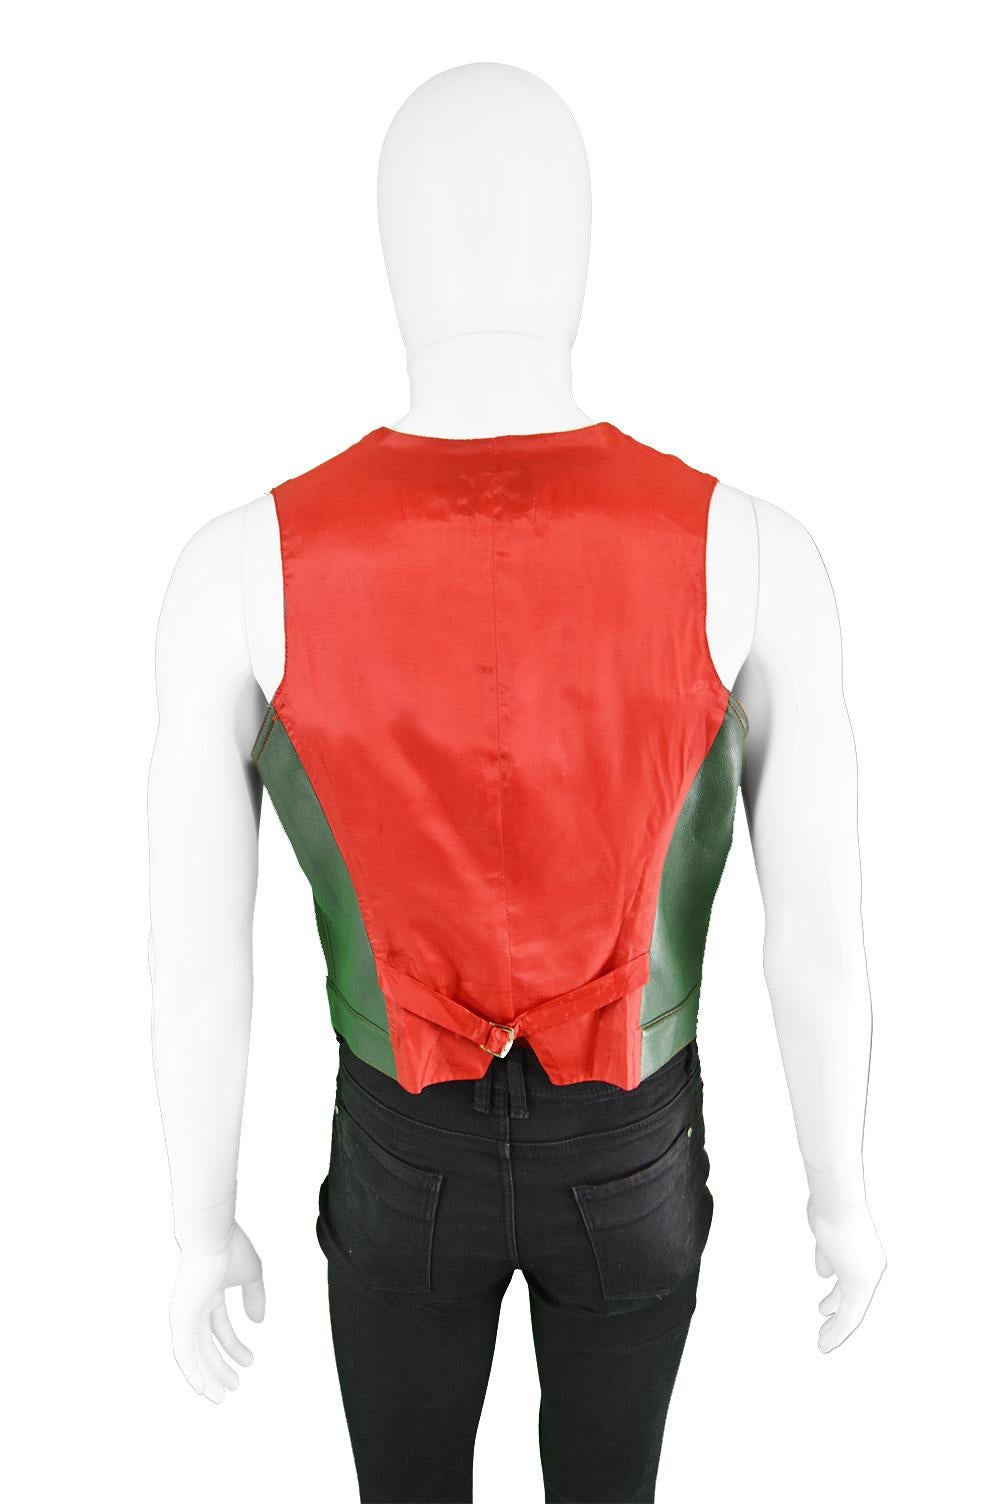 Jean Paul Gaultier Men's Green Faux Leather Vest with Red Taffeta Back, 1980s For Sale 2